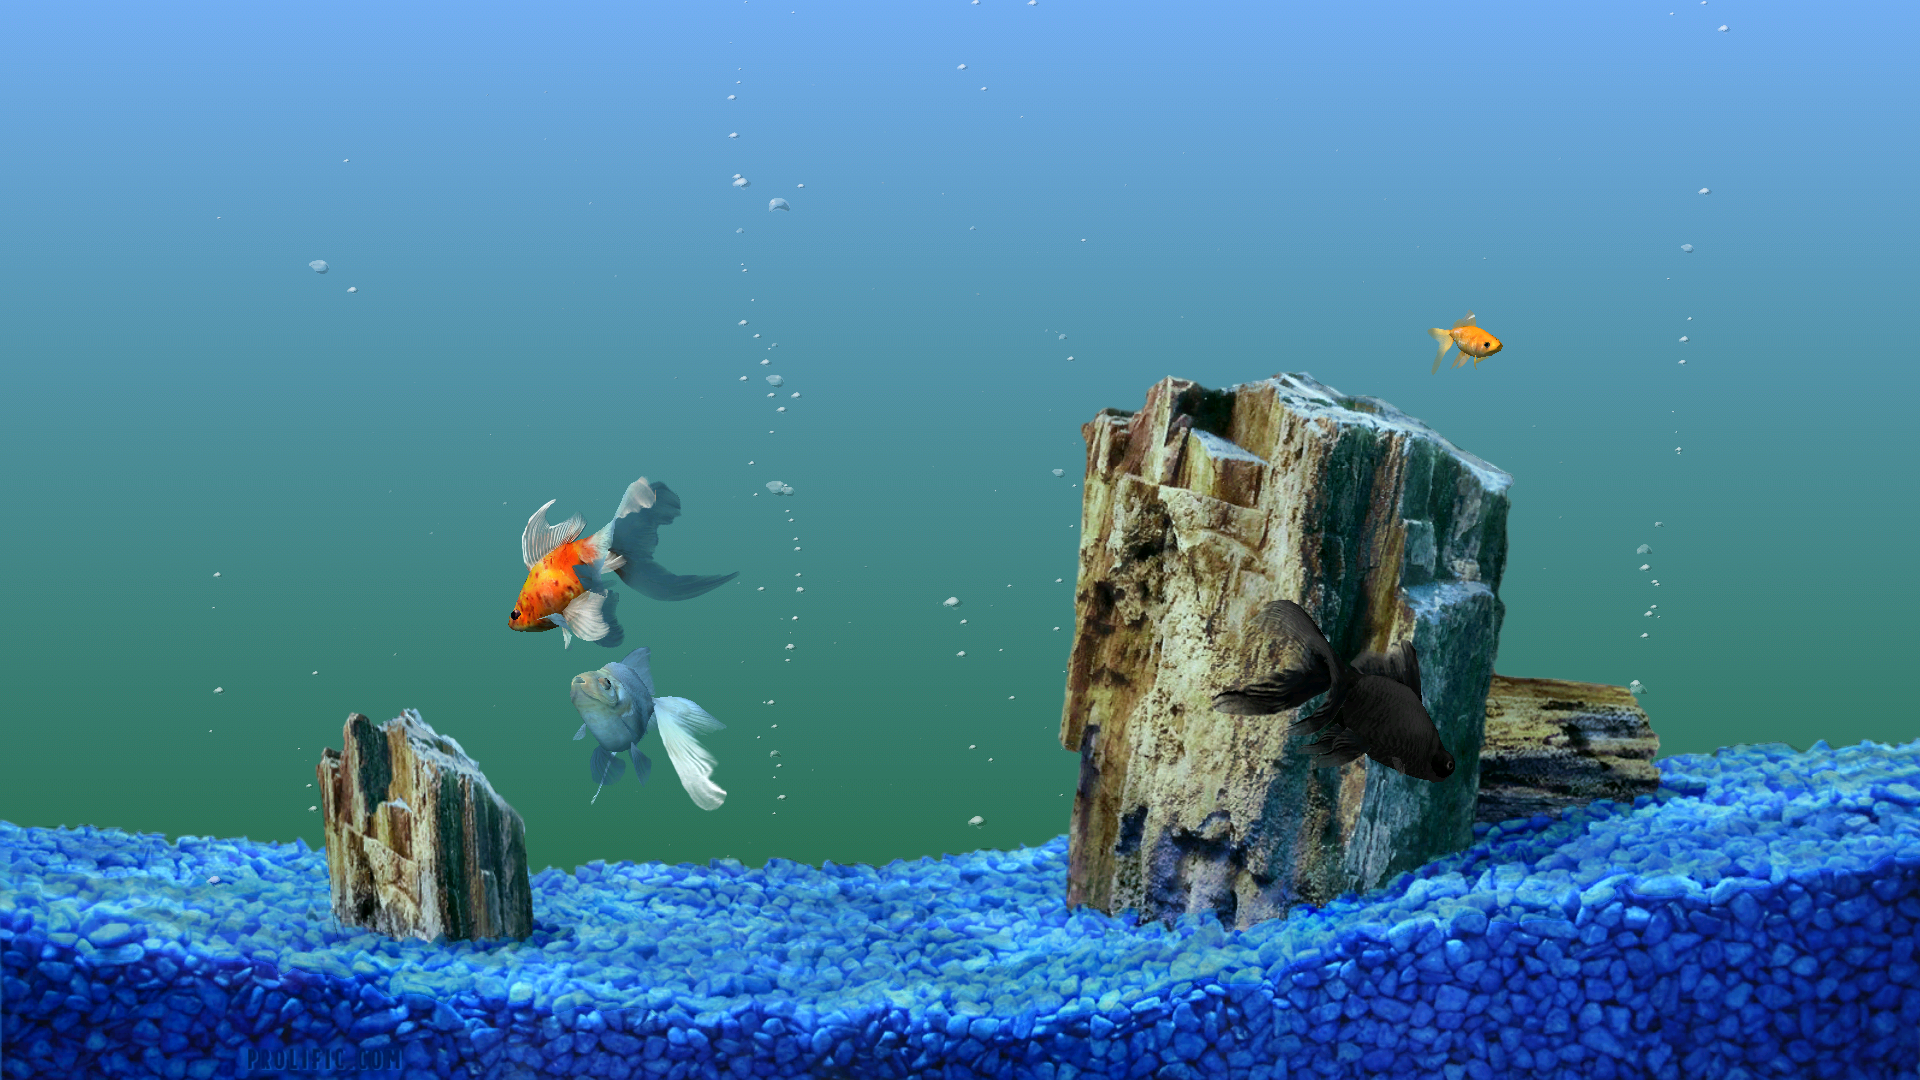 Live Fish Tank Wallpaper For Pc